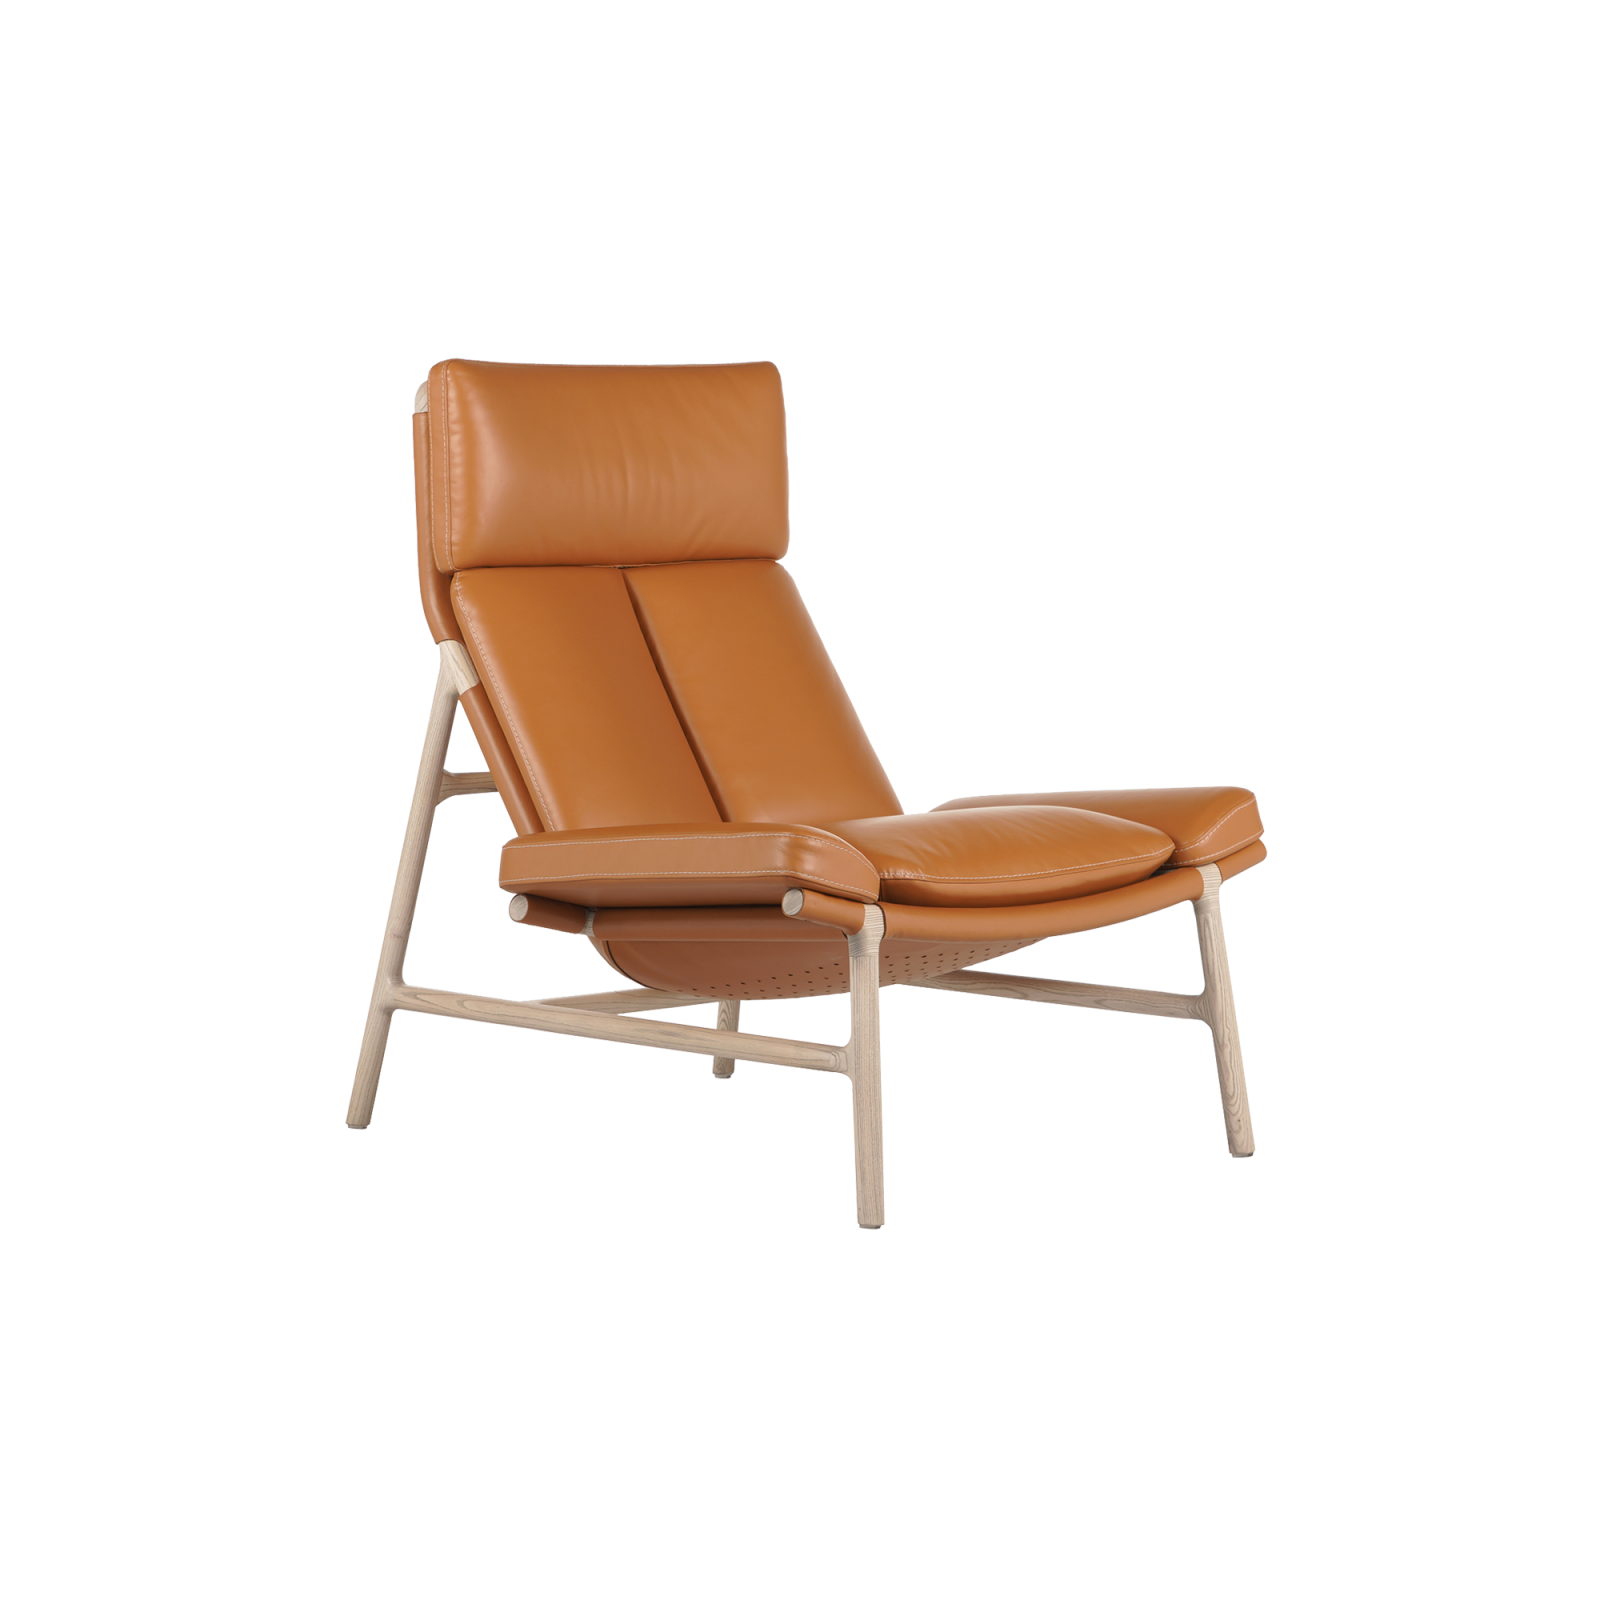 Lyon Bergere with 4 legs, ergonomic form and orange leather upholstery